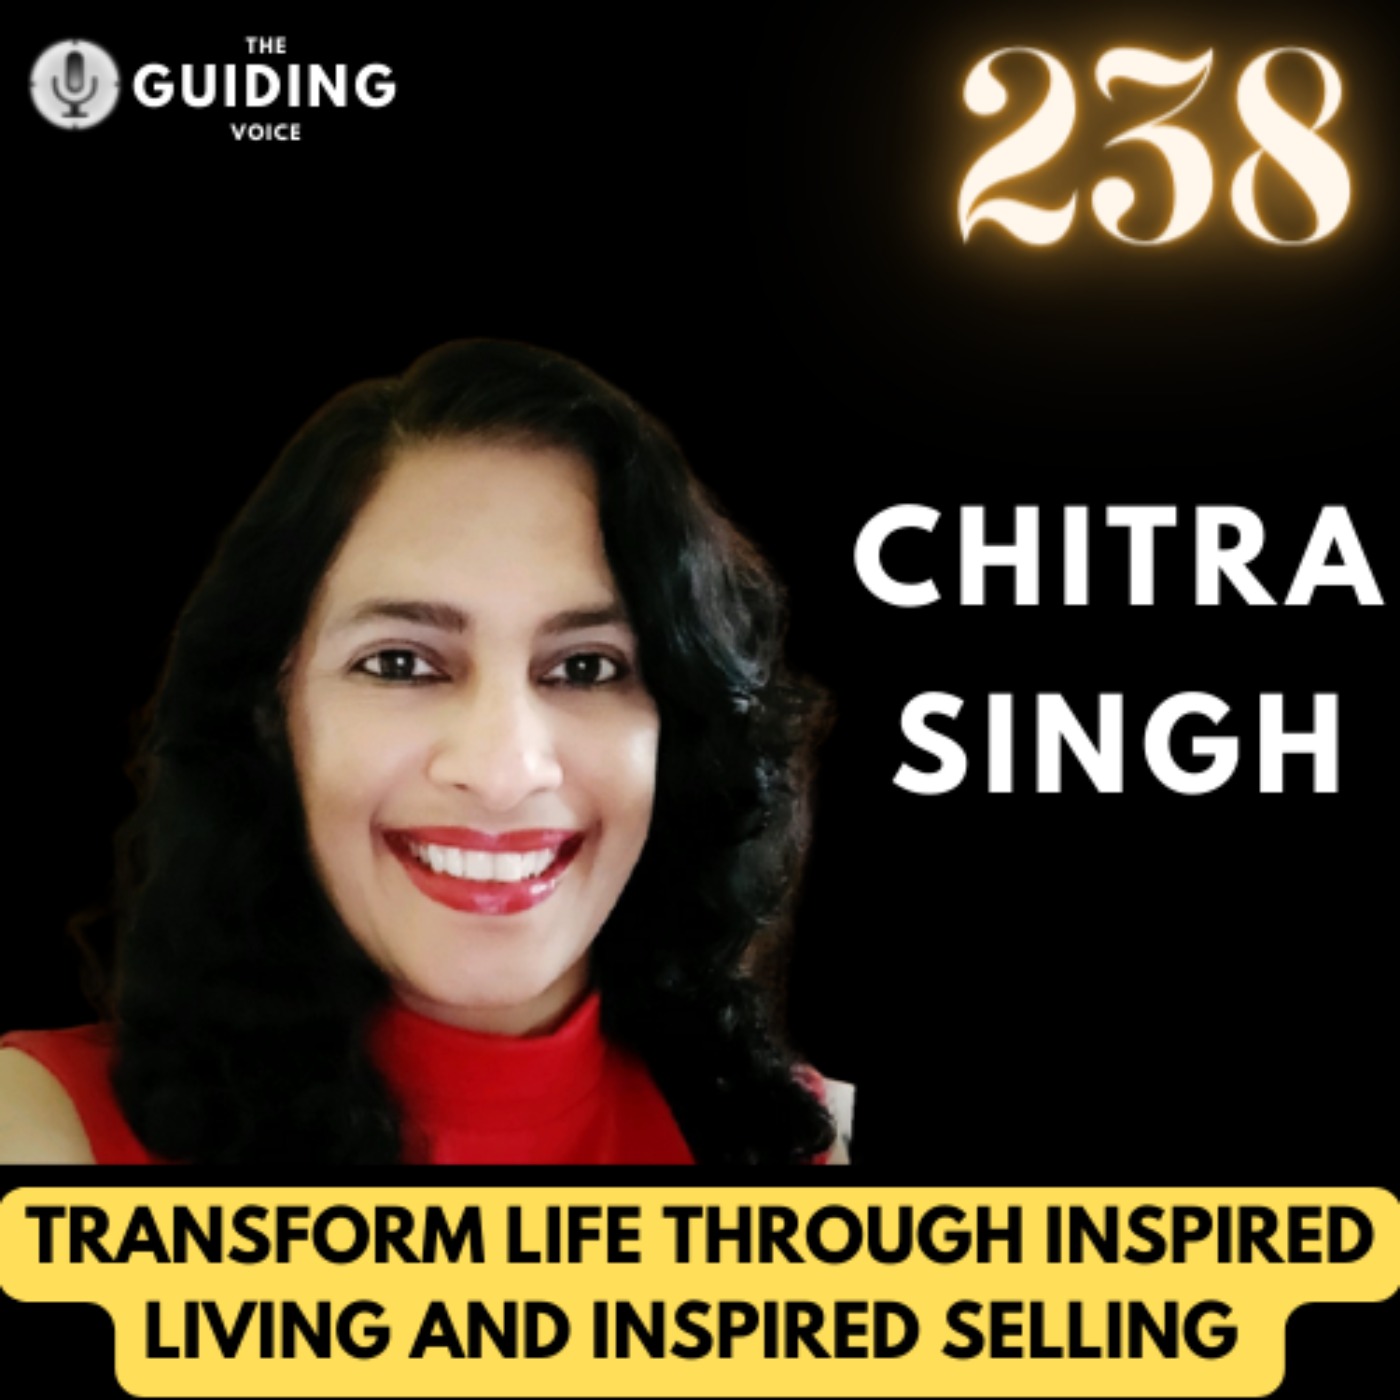 Inspired Living and Inspired Selling can transform your life | Chitra Singh | #TGV238